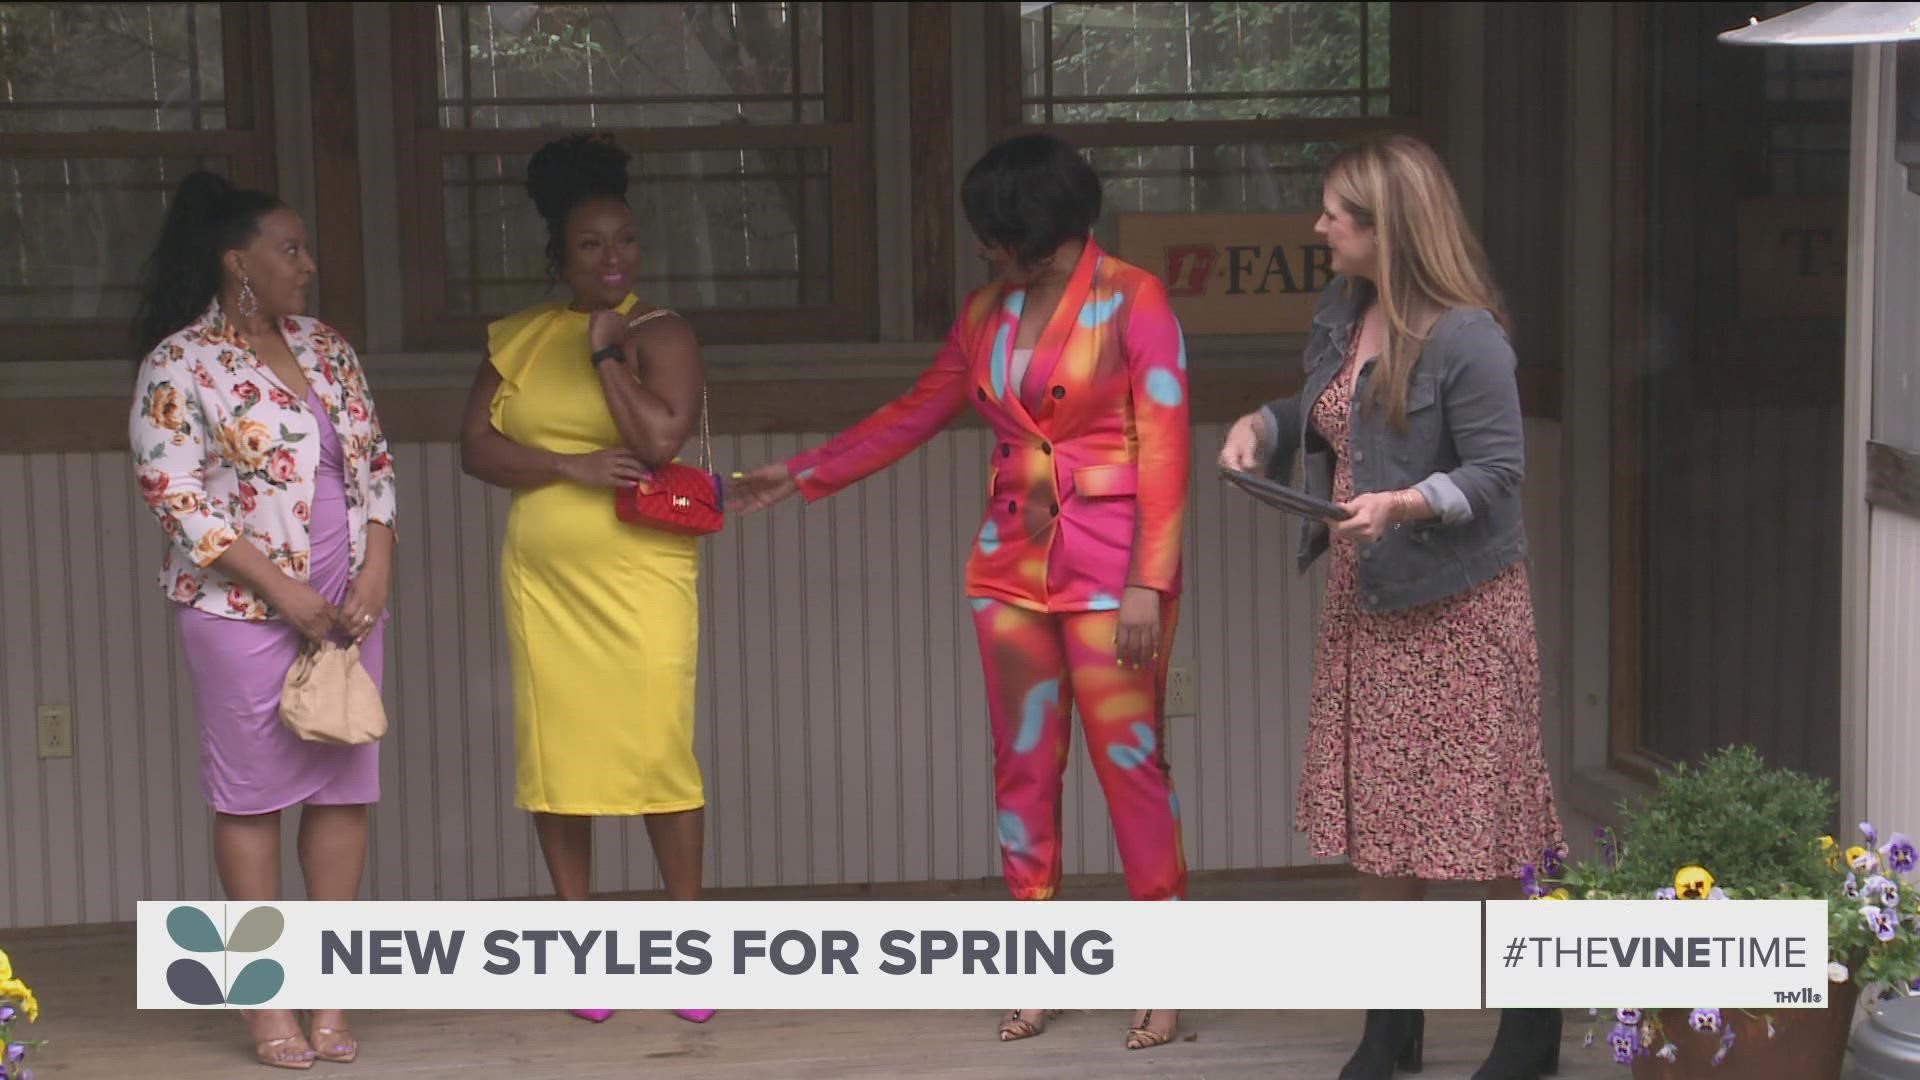 Style Me Stephanie is a professional fashion styling business that specializes in styling from your closet, personal shopping, virtual styling and more.